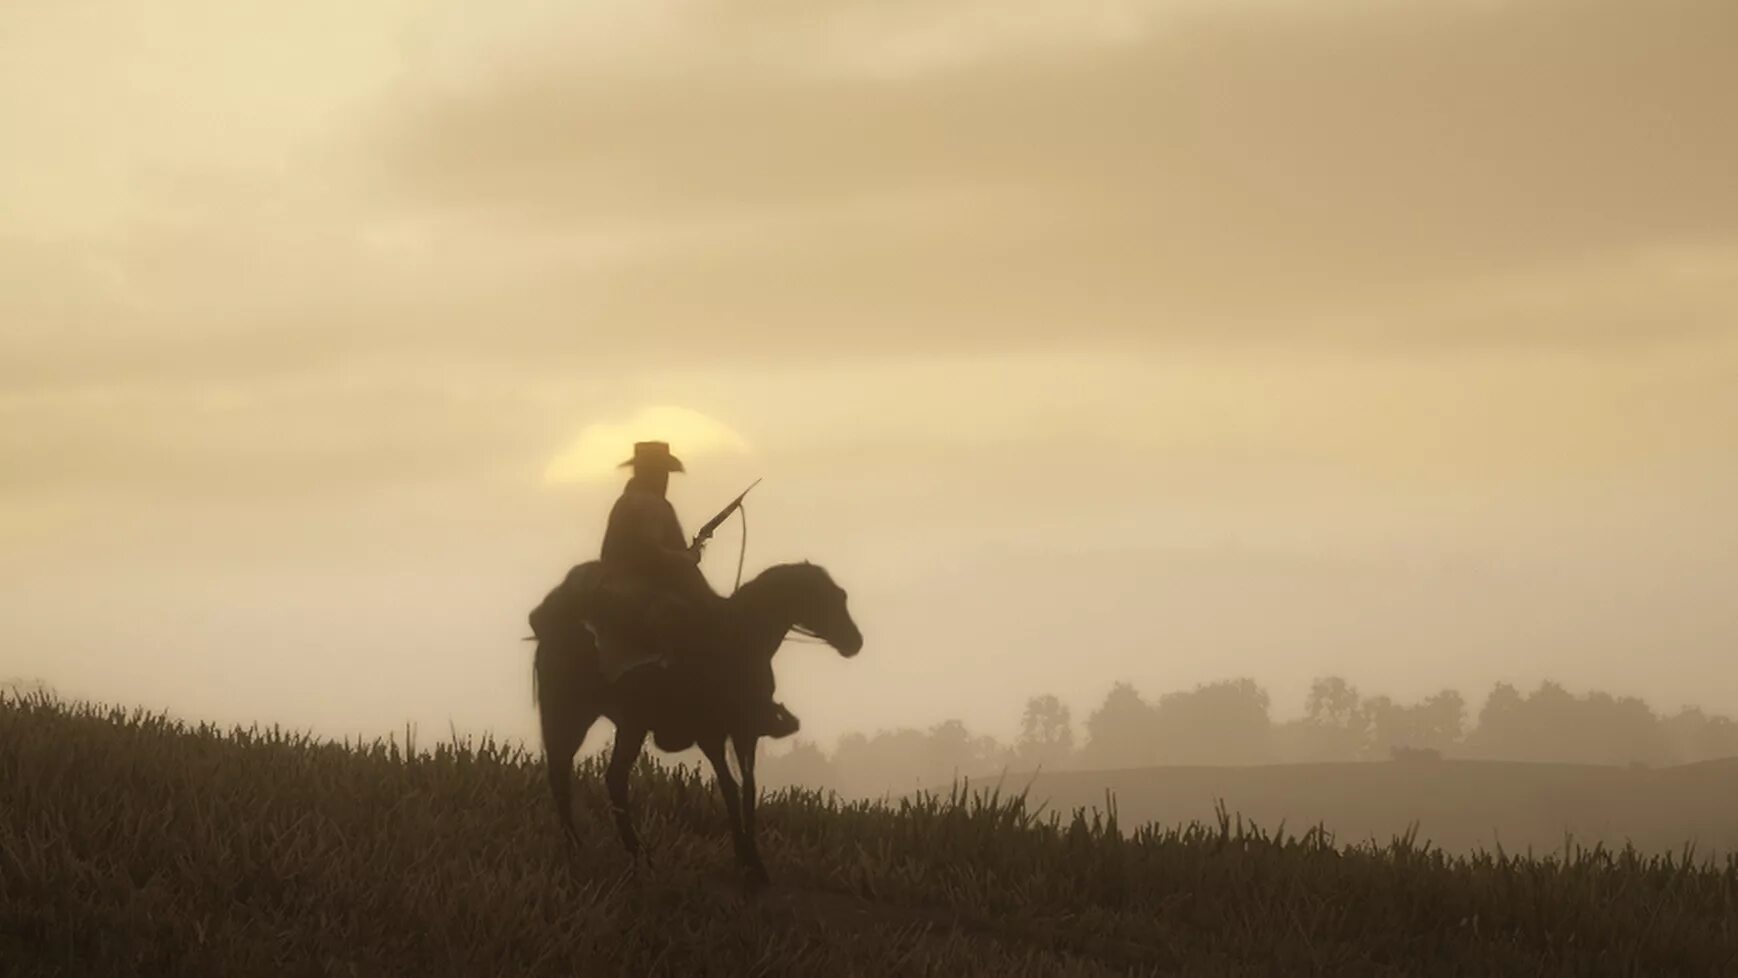 Red dead redemption 2 природа. Red Dead Redemption 2. Red Dead Redemption 2 пейзажи. РДР 2 природа. Red Dead Redemption природа.